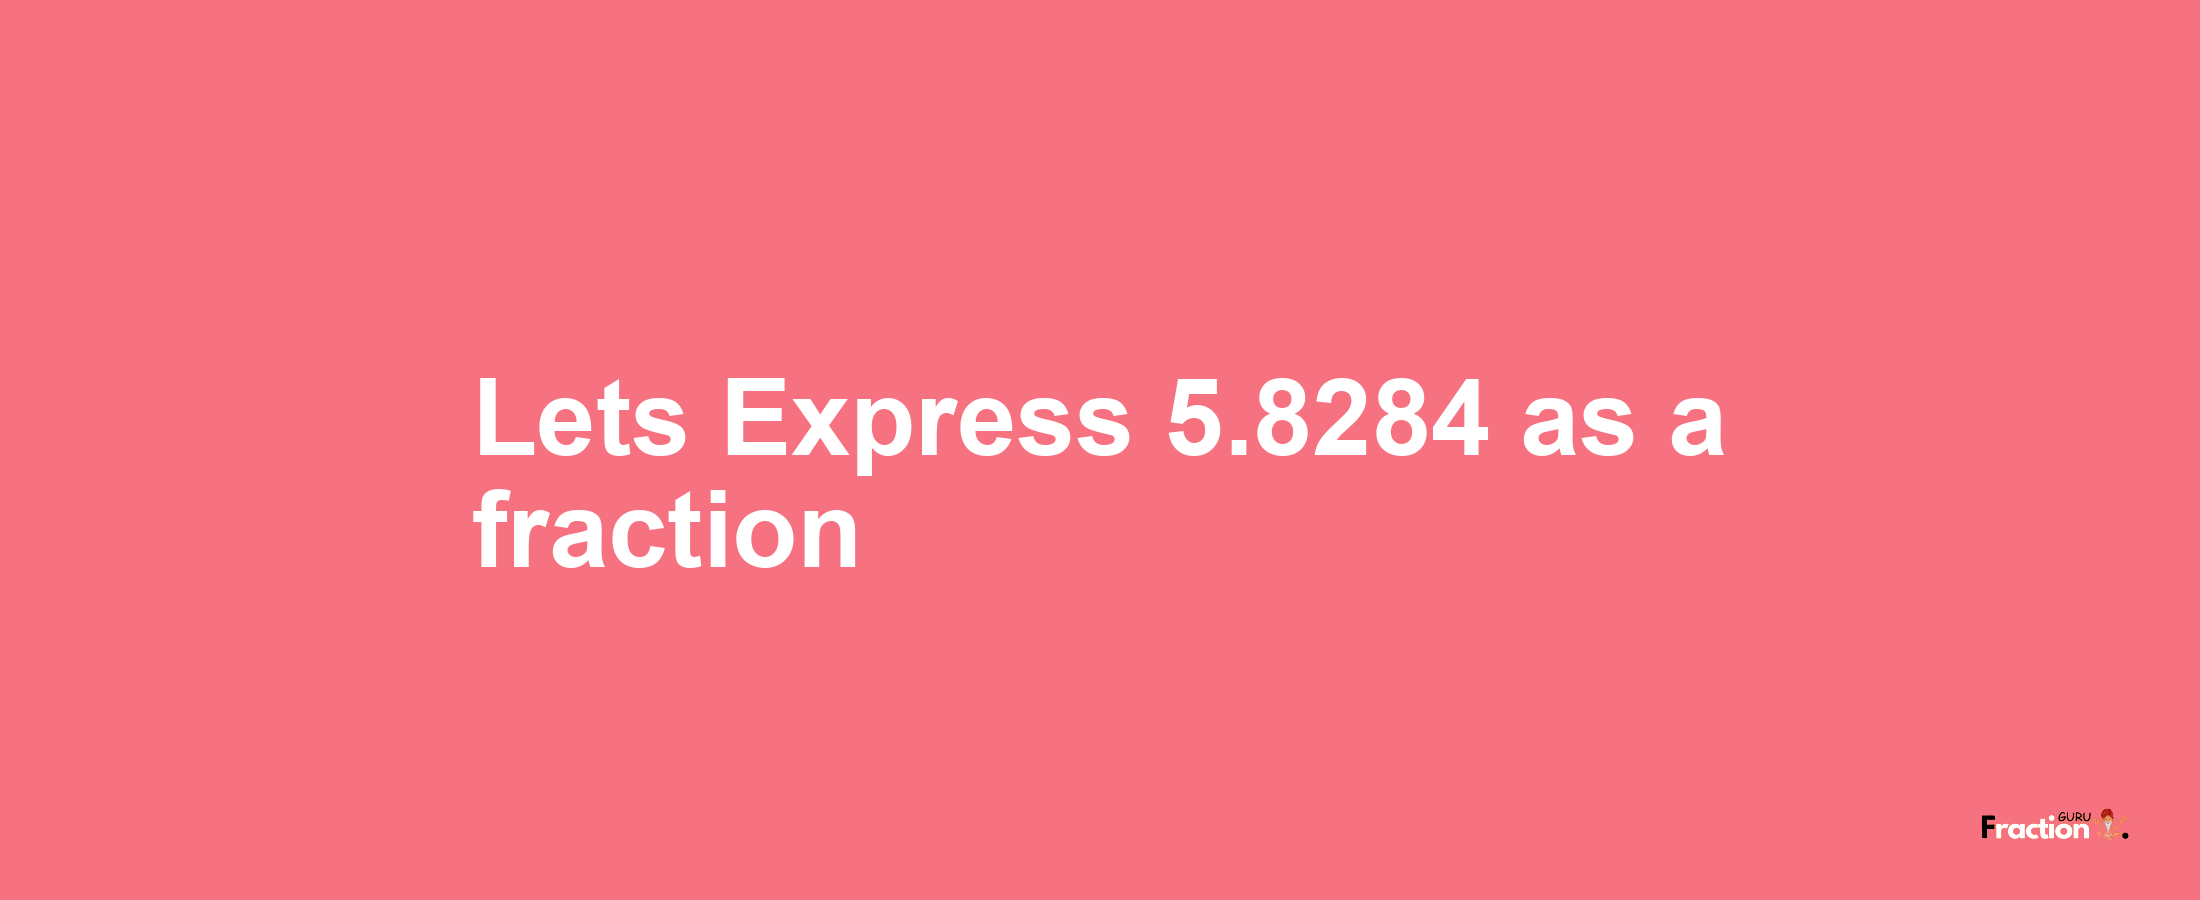 Lets Express 5.8284 as afraction